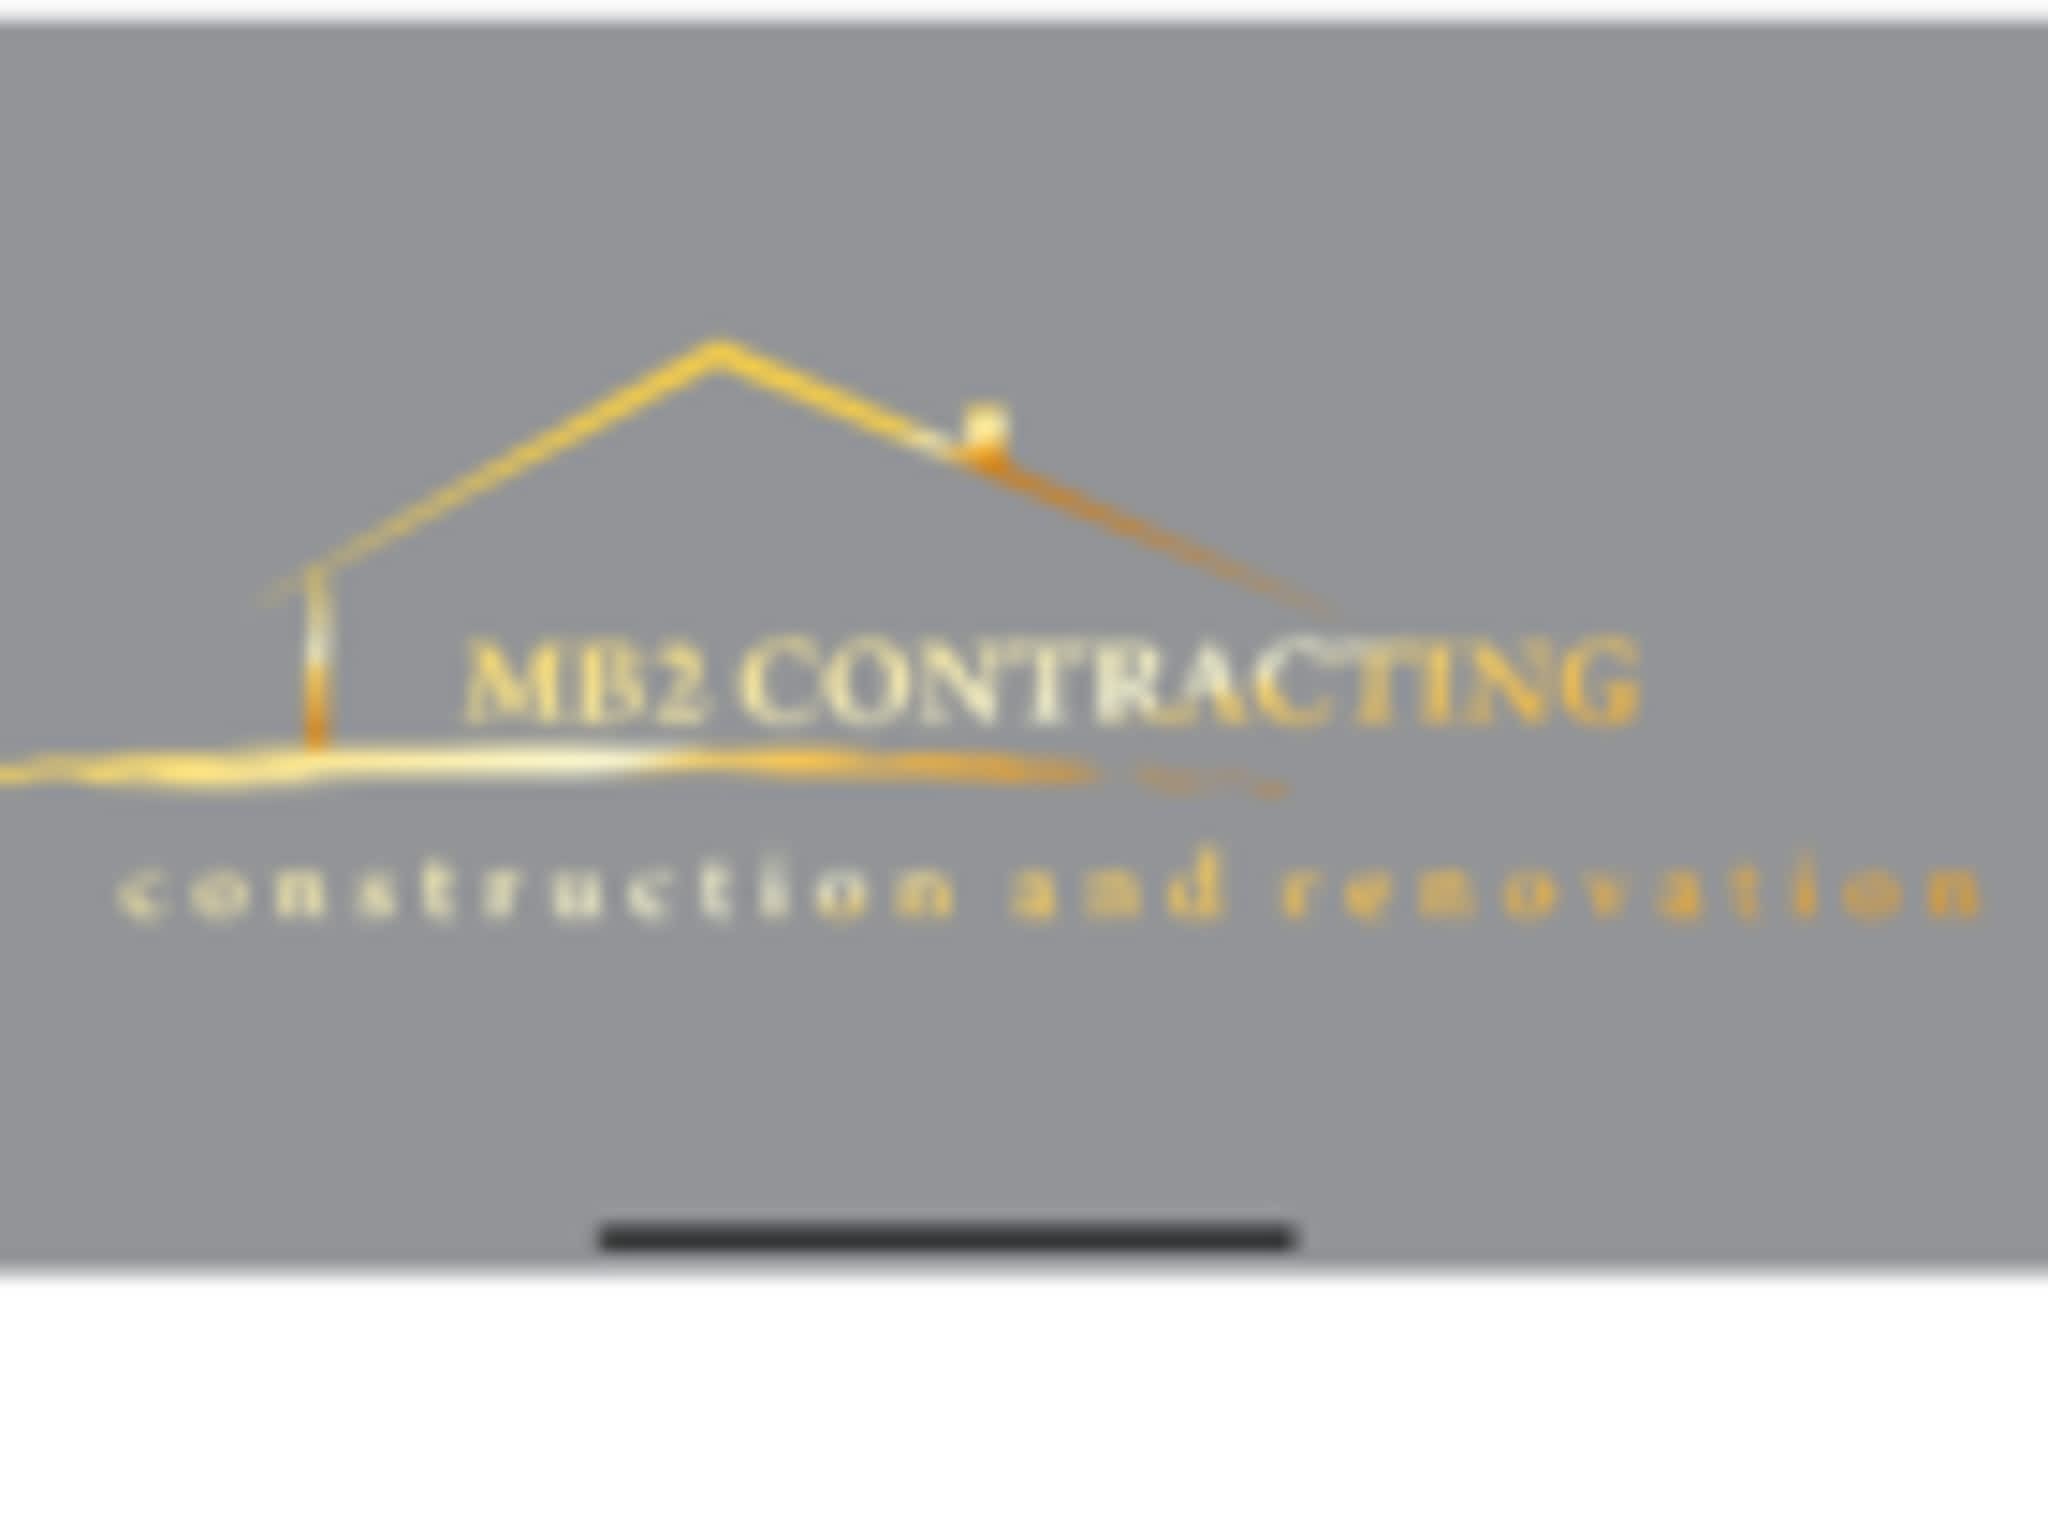 photo MB2 Contracting